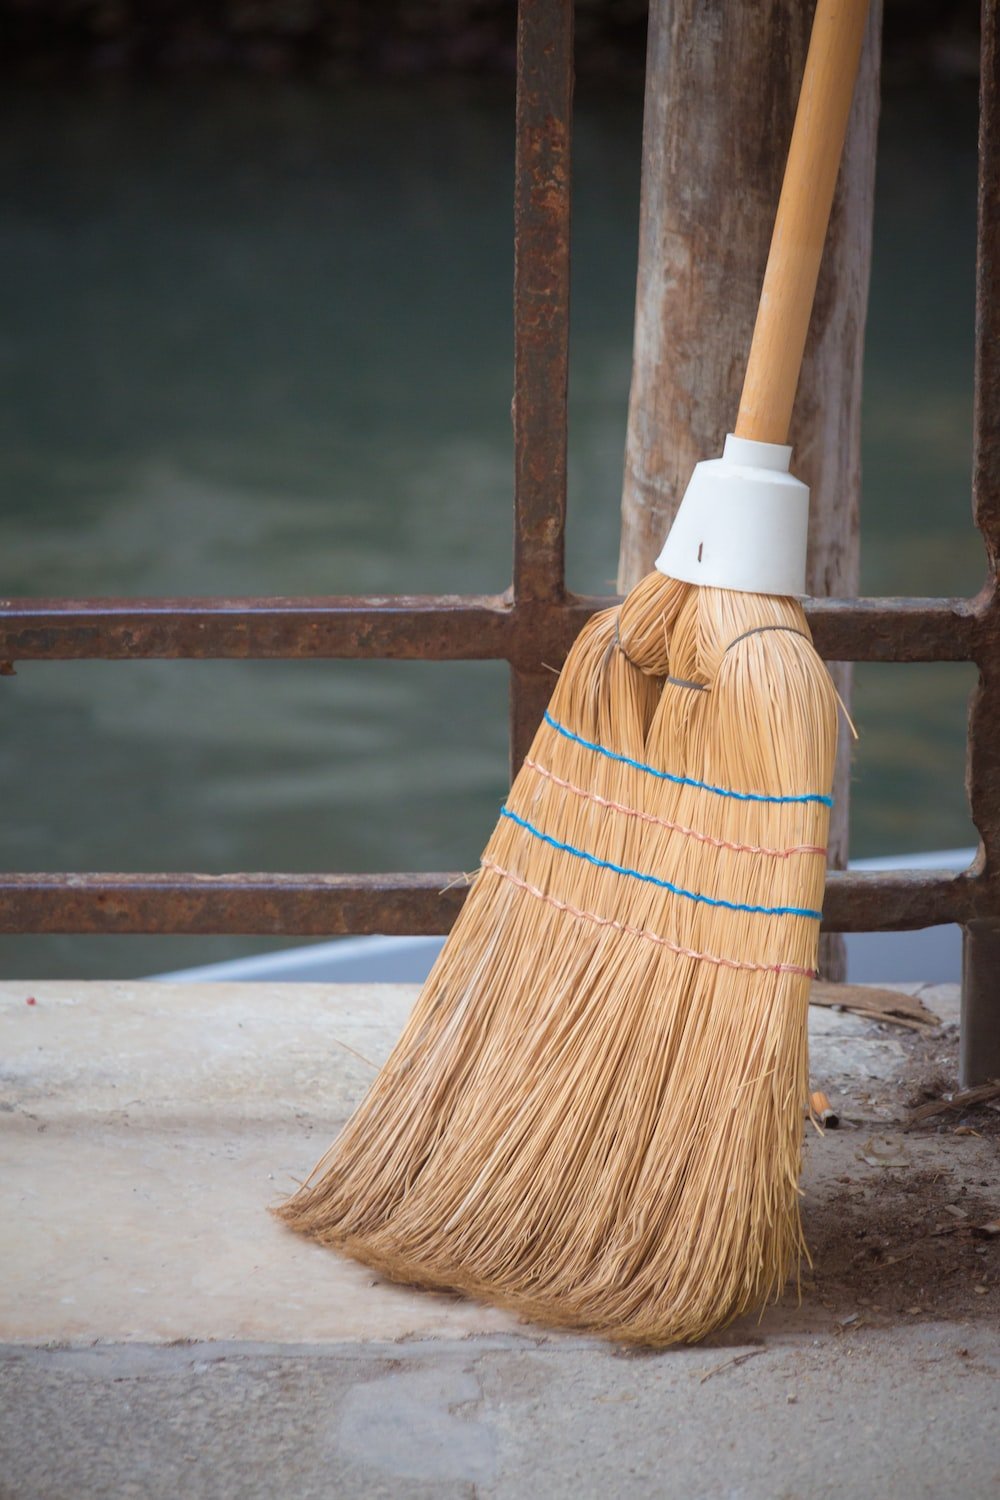 Broom Picture. Download Free Image